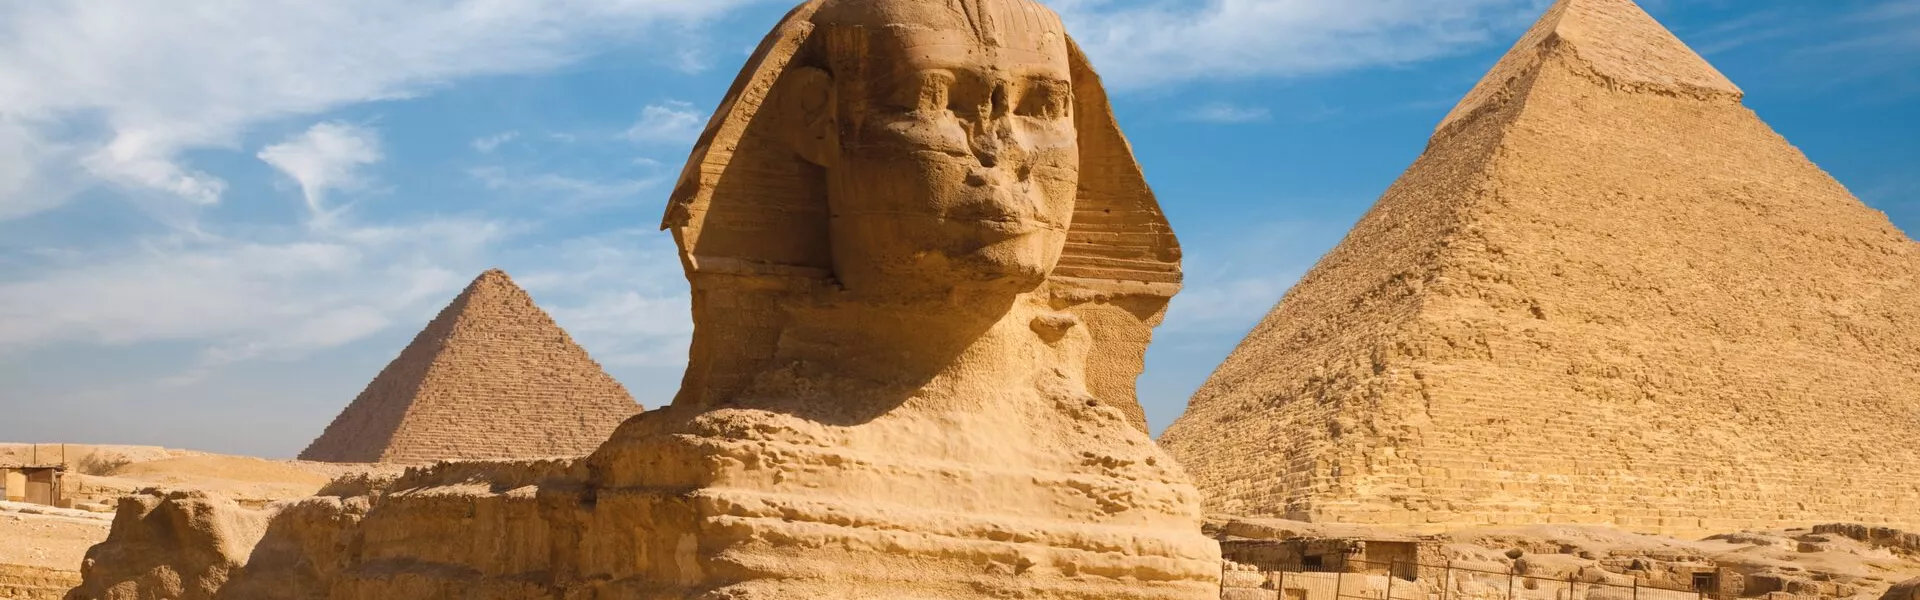 Egypt Guided Tours and Travel Guide